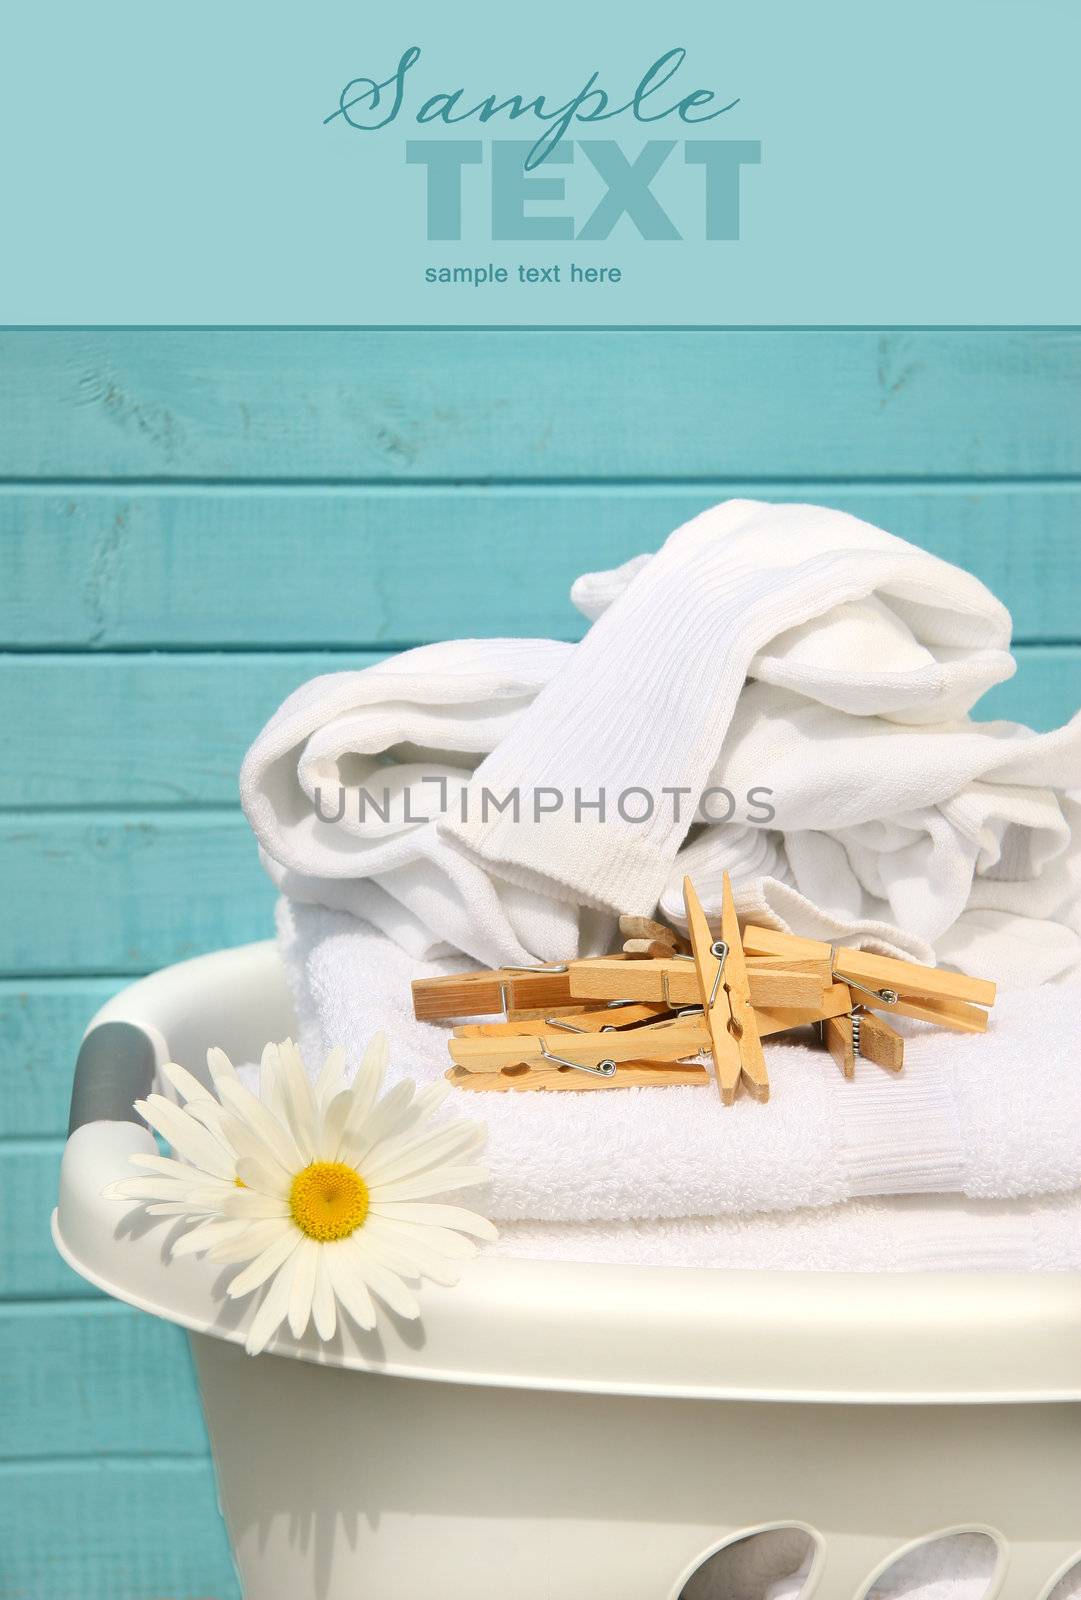 White laundry basket with folded towels and socks